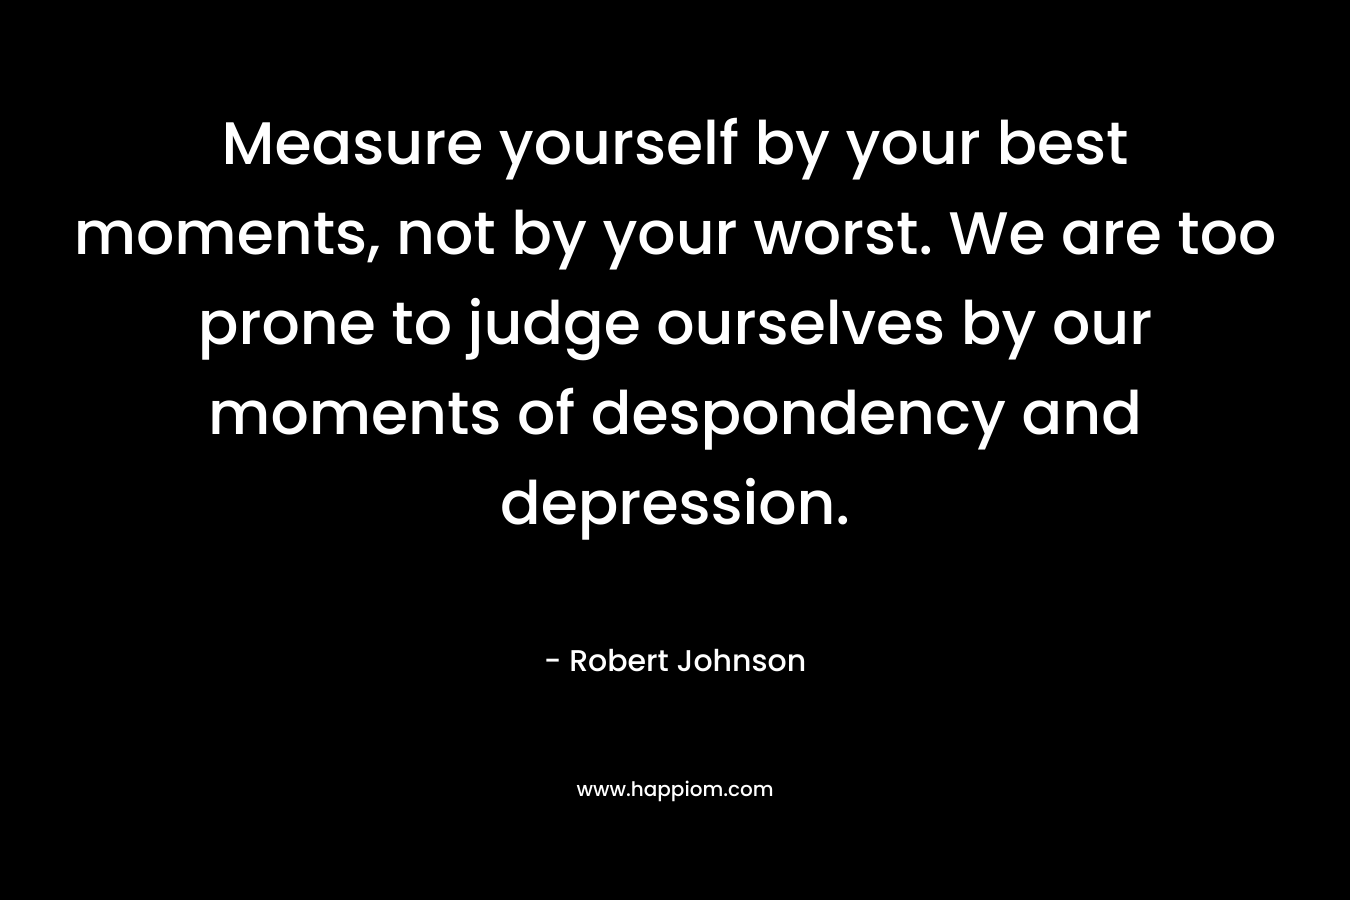 Measure yourself by your best moments, not by your worst. We are too prone to judge ourselves by our moments of despondency and depression. – Robert Johnson